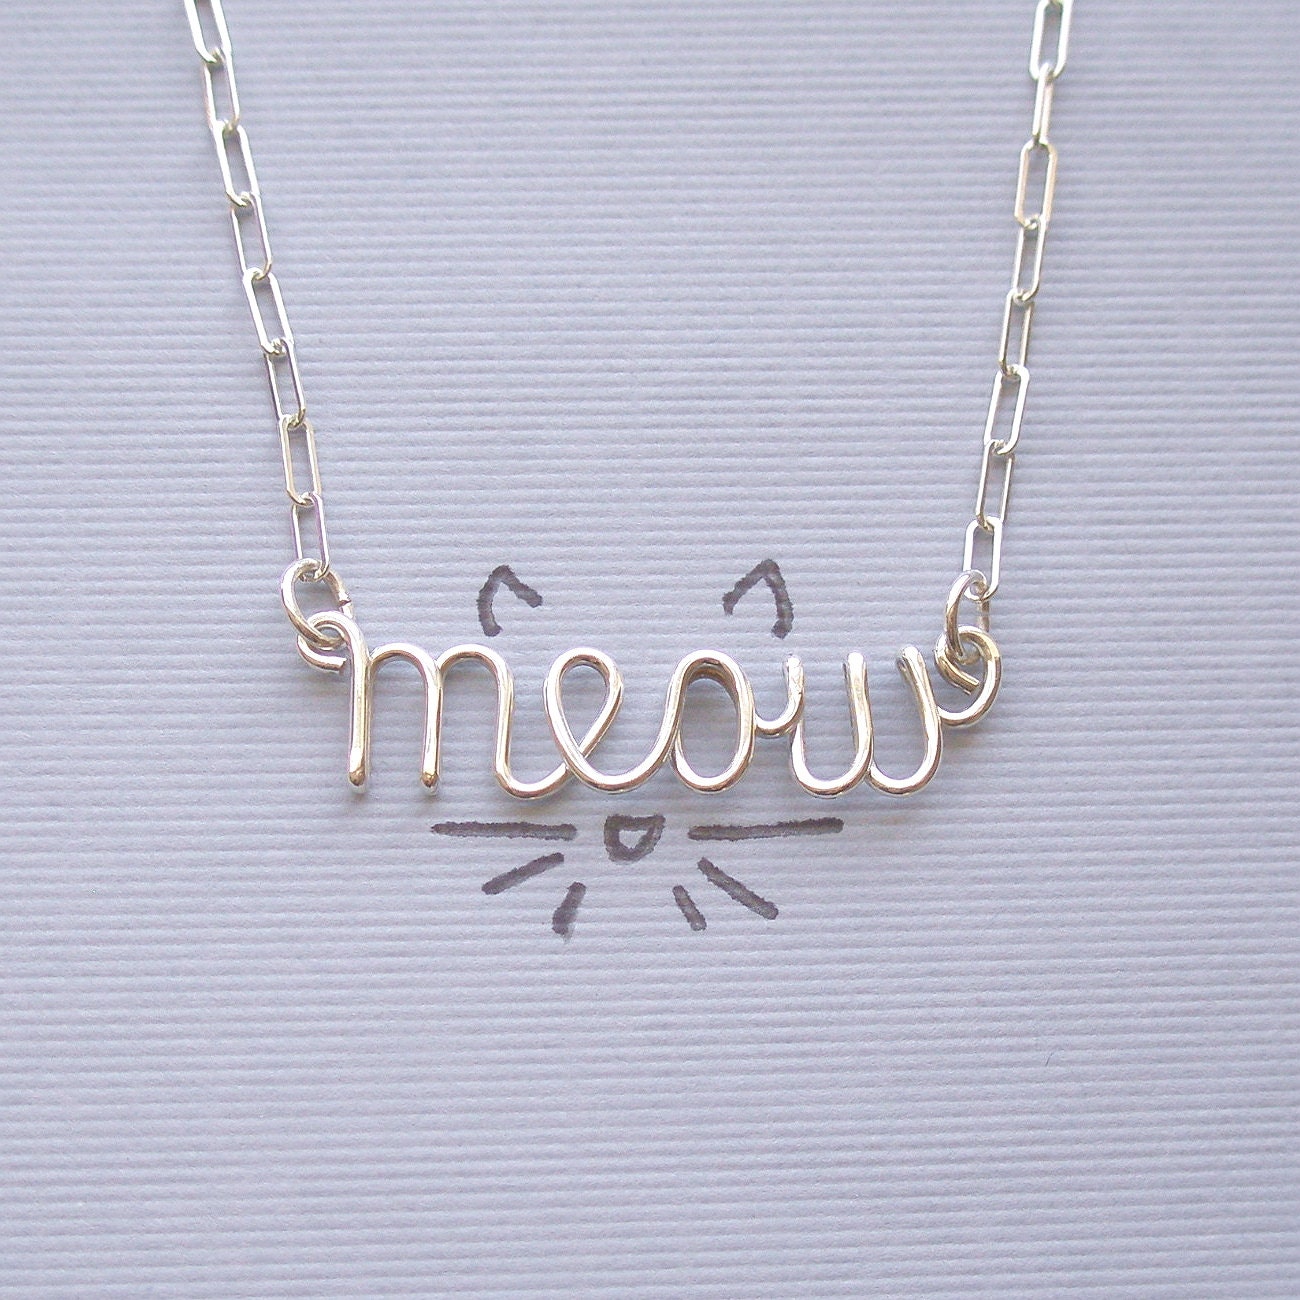 meow necklace - all sterling silver